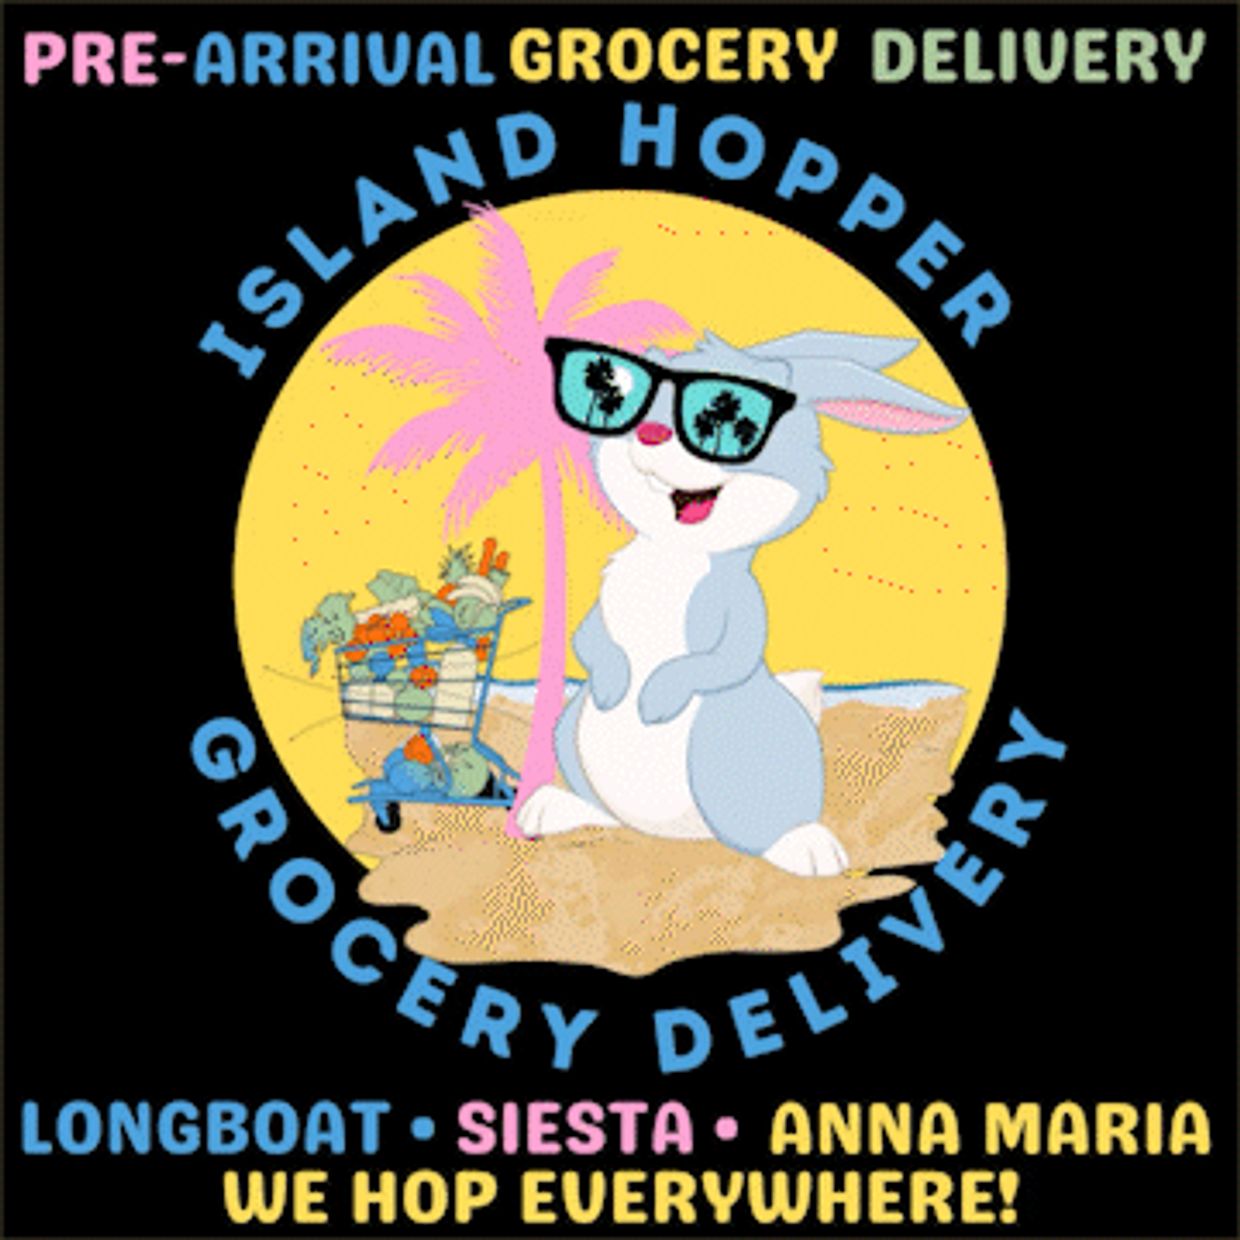 Island Hopper Grocery Delivery, Pre-Arrival Grocery Delivery, Resort Delivery, AirBNBgrocery deliver